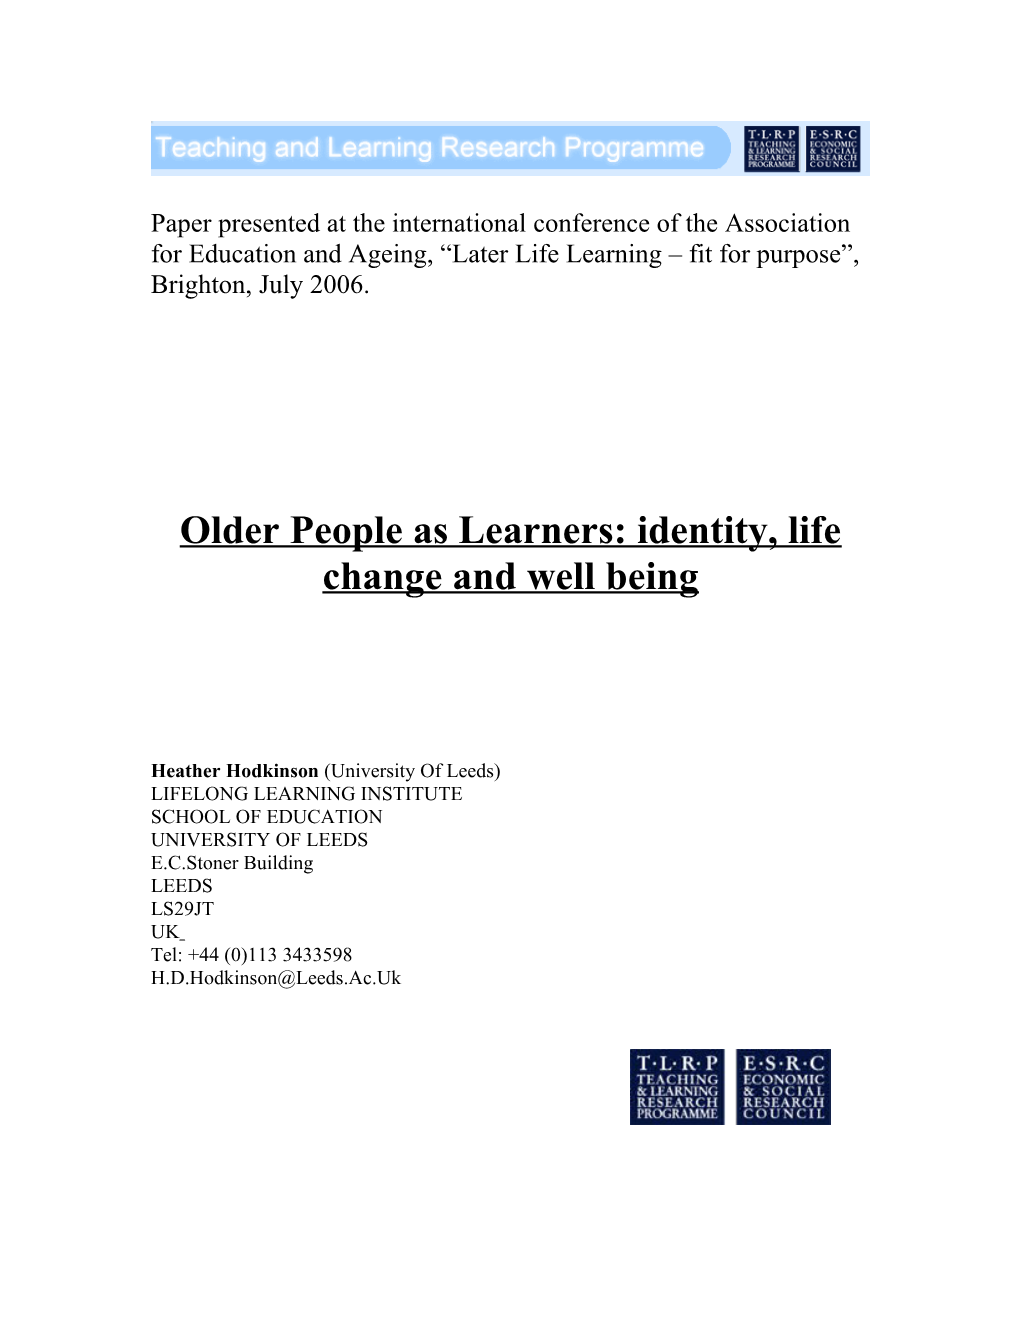 Older People As Learners: Identity, Life Change and Well Being